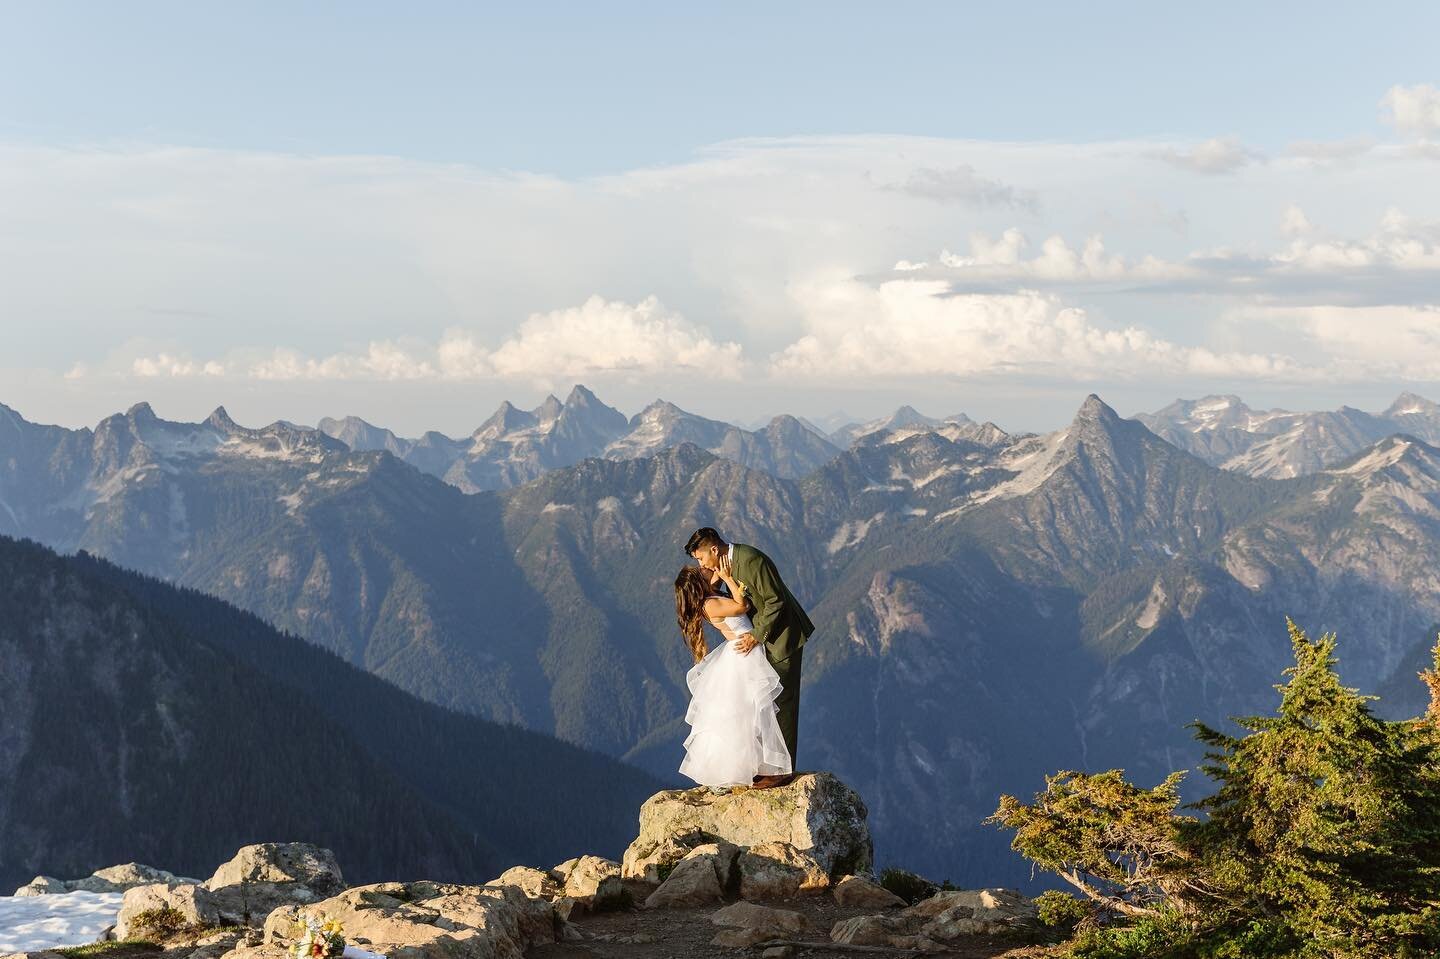 Now that we&rsquo;re back in the PNW I&rsquo;m starting to really get excited to return to the mountains 😍

North Cascades Elopement | Washington Hiking Elopement | Mt. Baker Elopement 

#mtbaker #northcascades #adventurewedding #northcascadeselopem